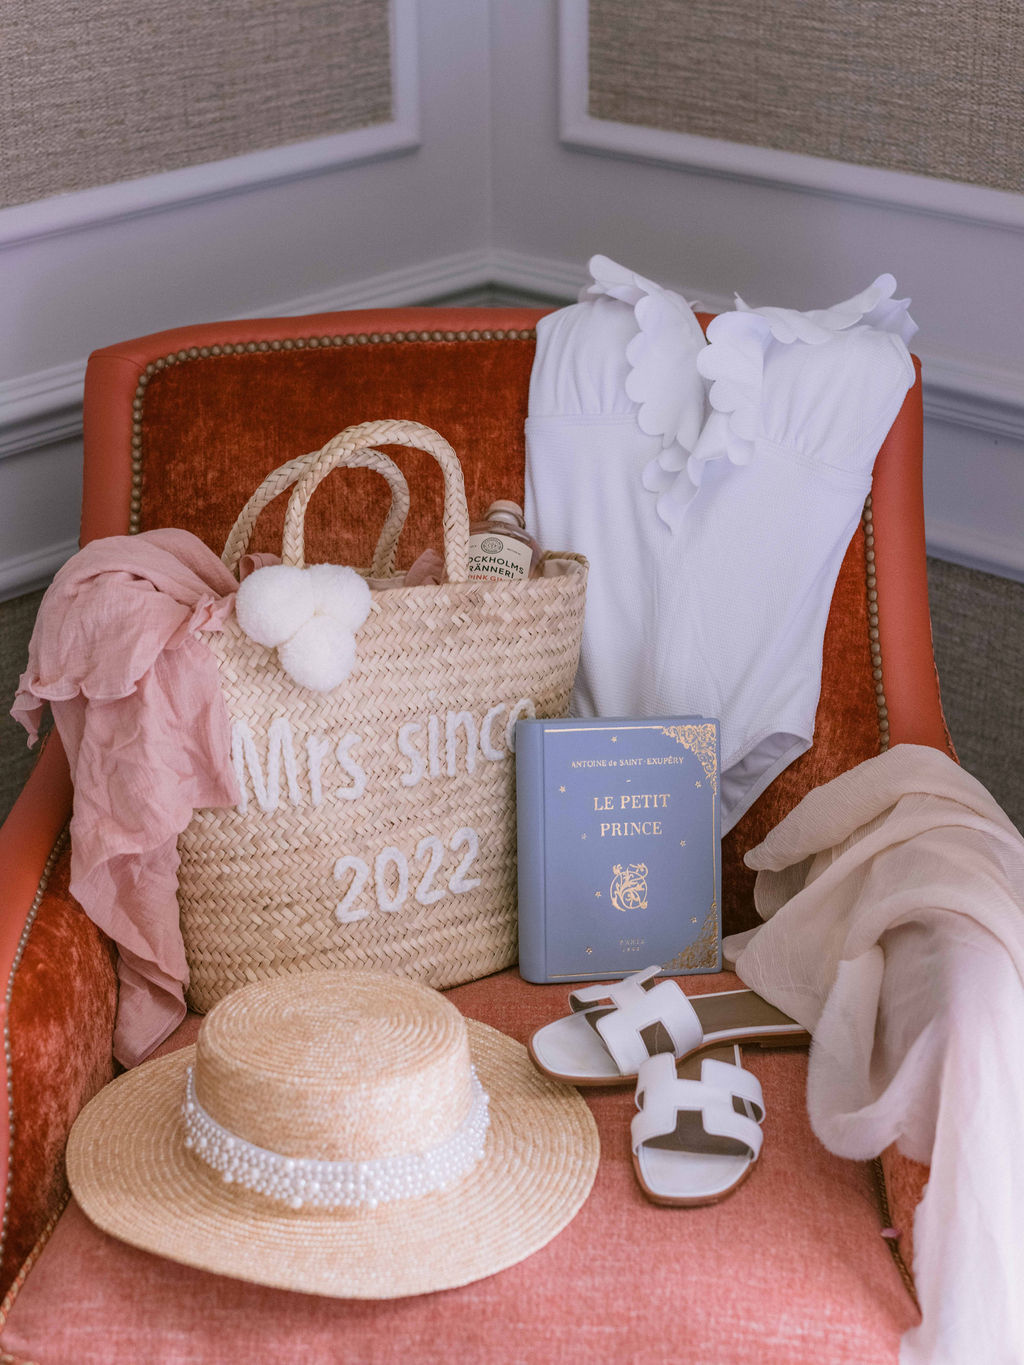 Honeymoon bag, hat, book and costume posed on chair at Four Seasons Hampshire